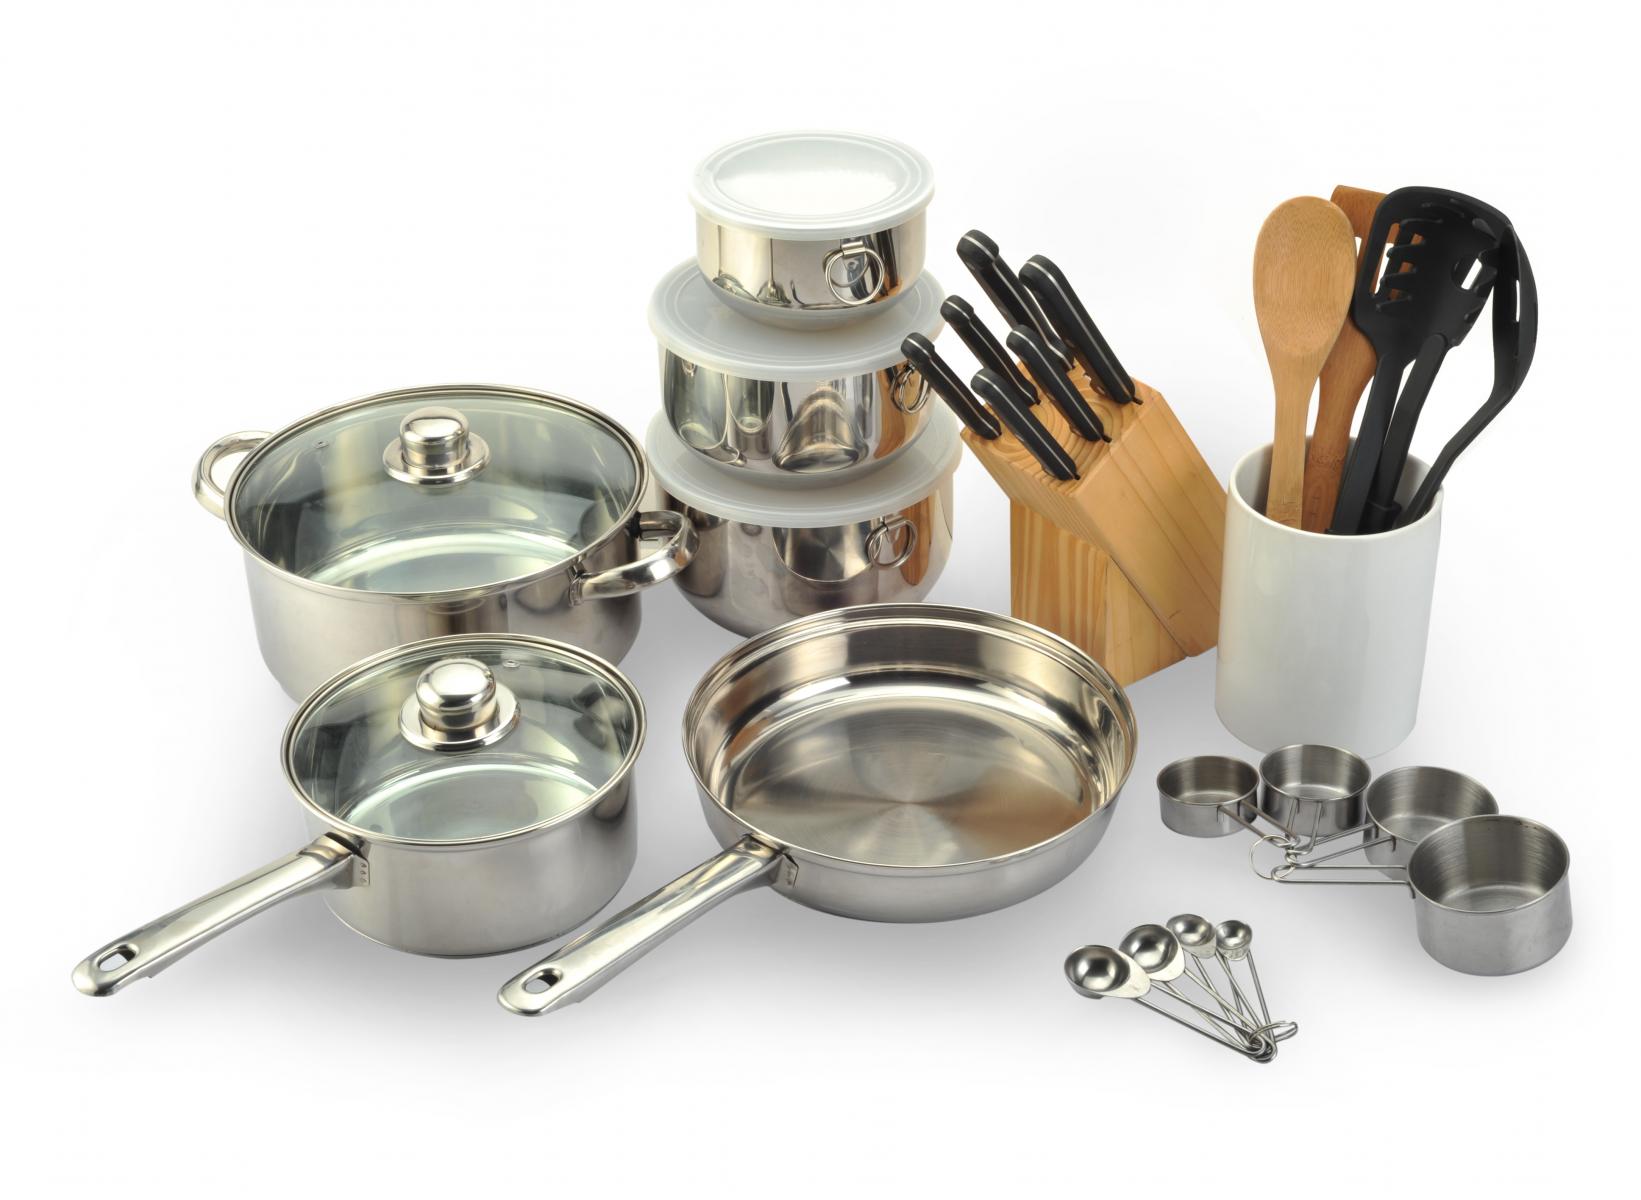 Full Kitchen Set from CRTO